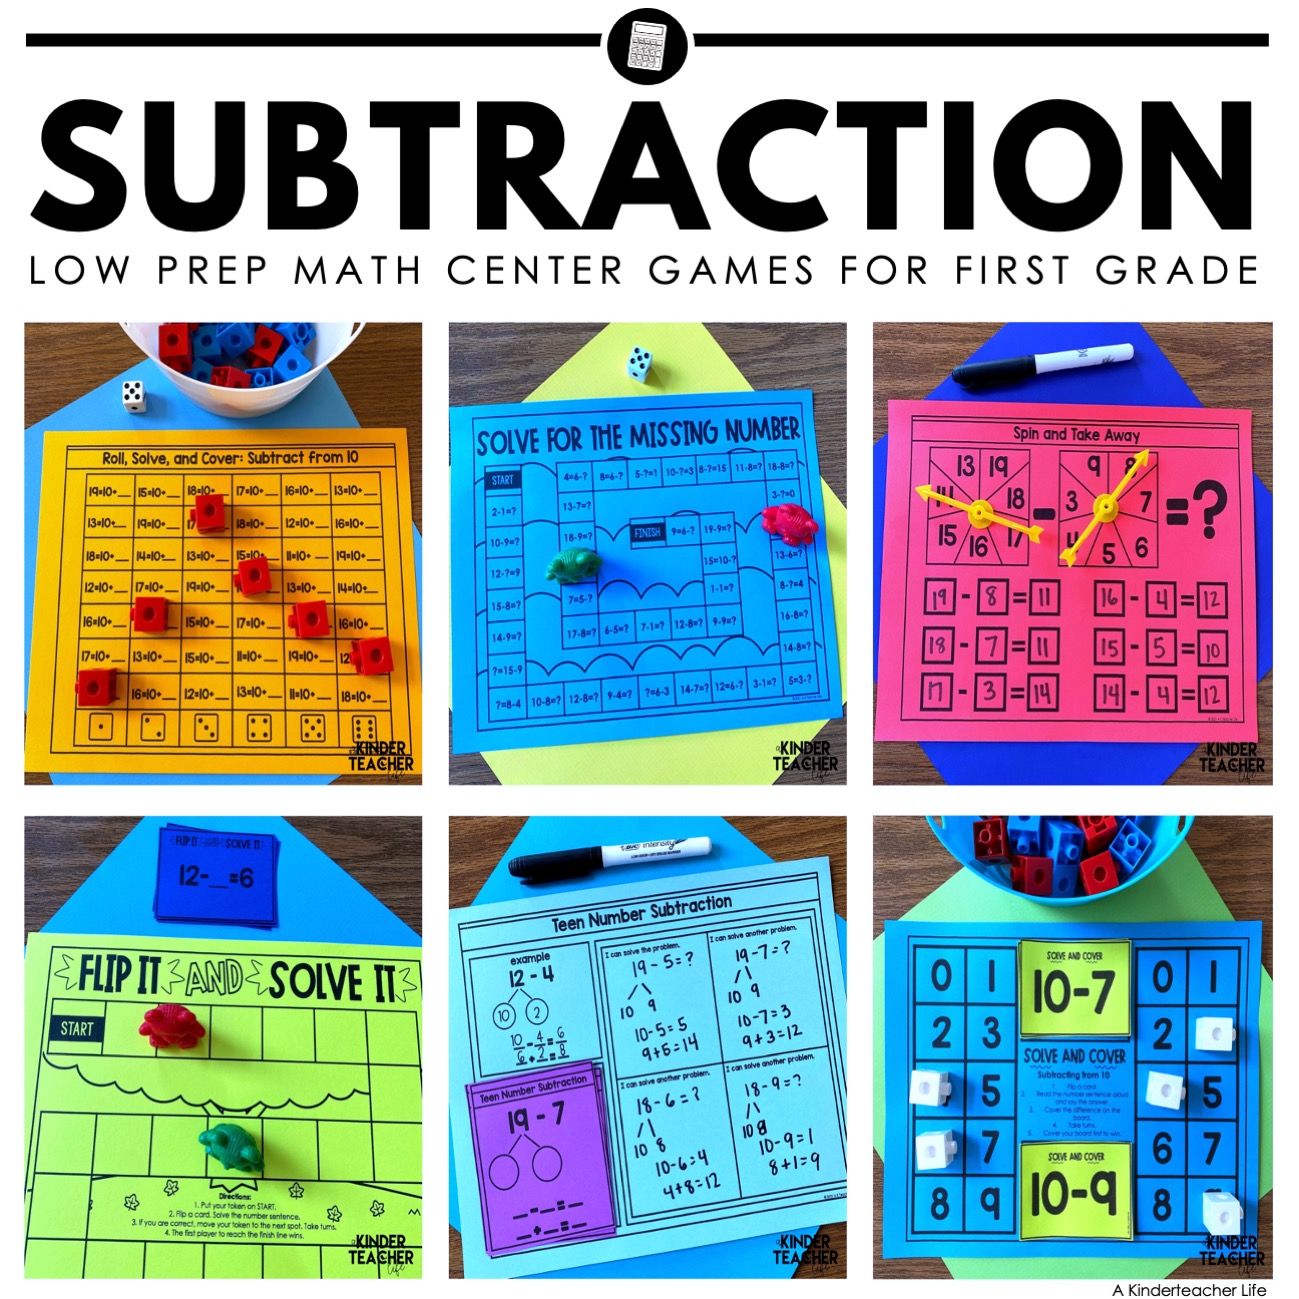 Low prep Subtraction Math Centers for First Grade